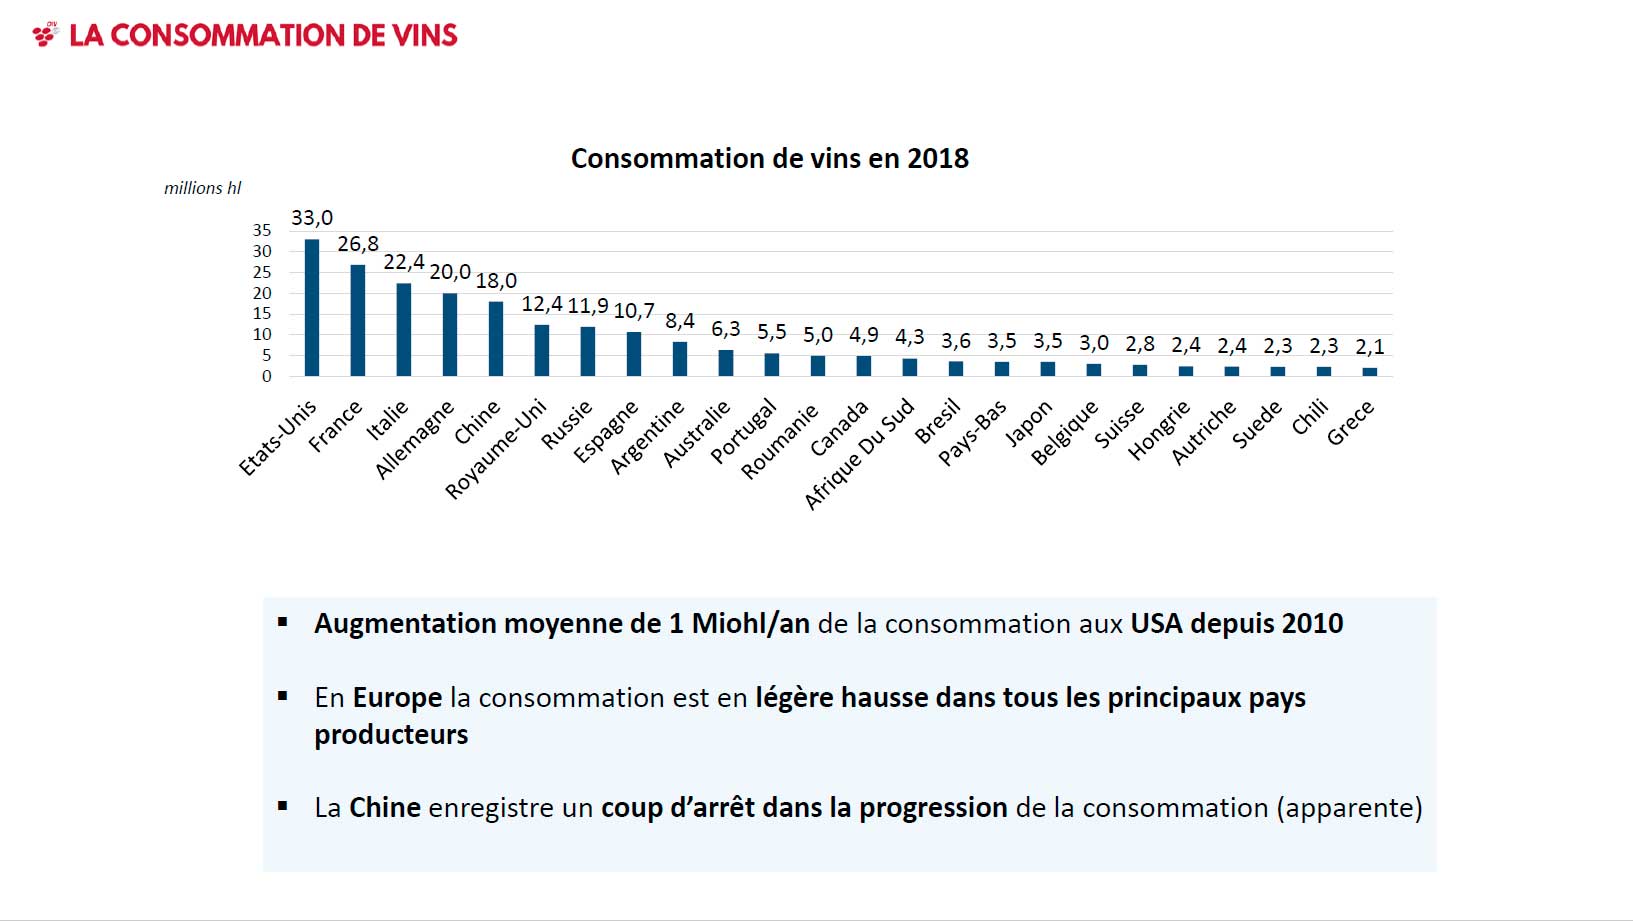 World wine consumption by country 2018